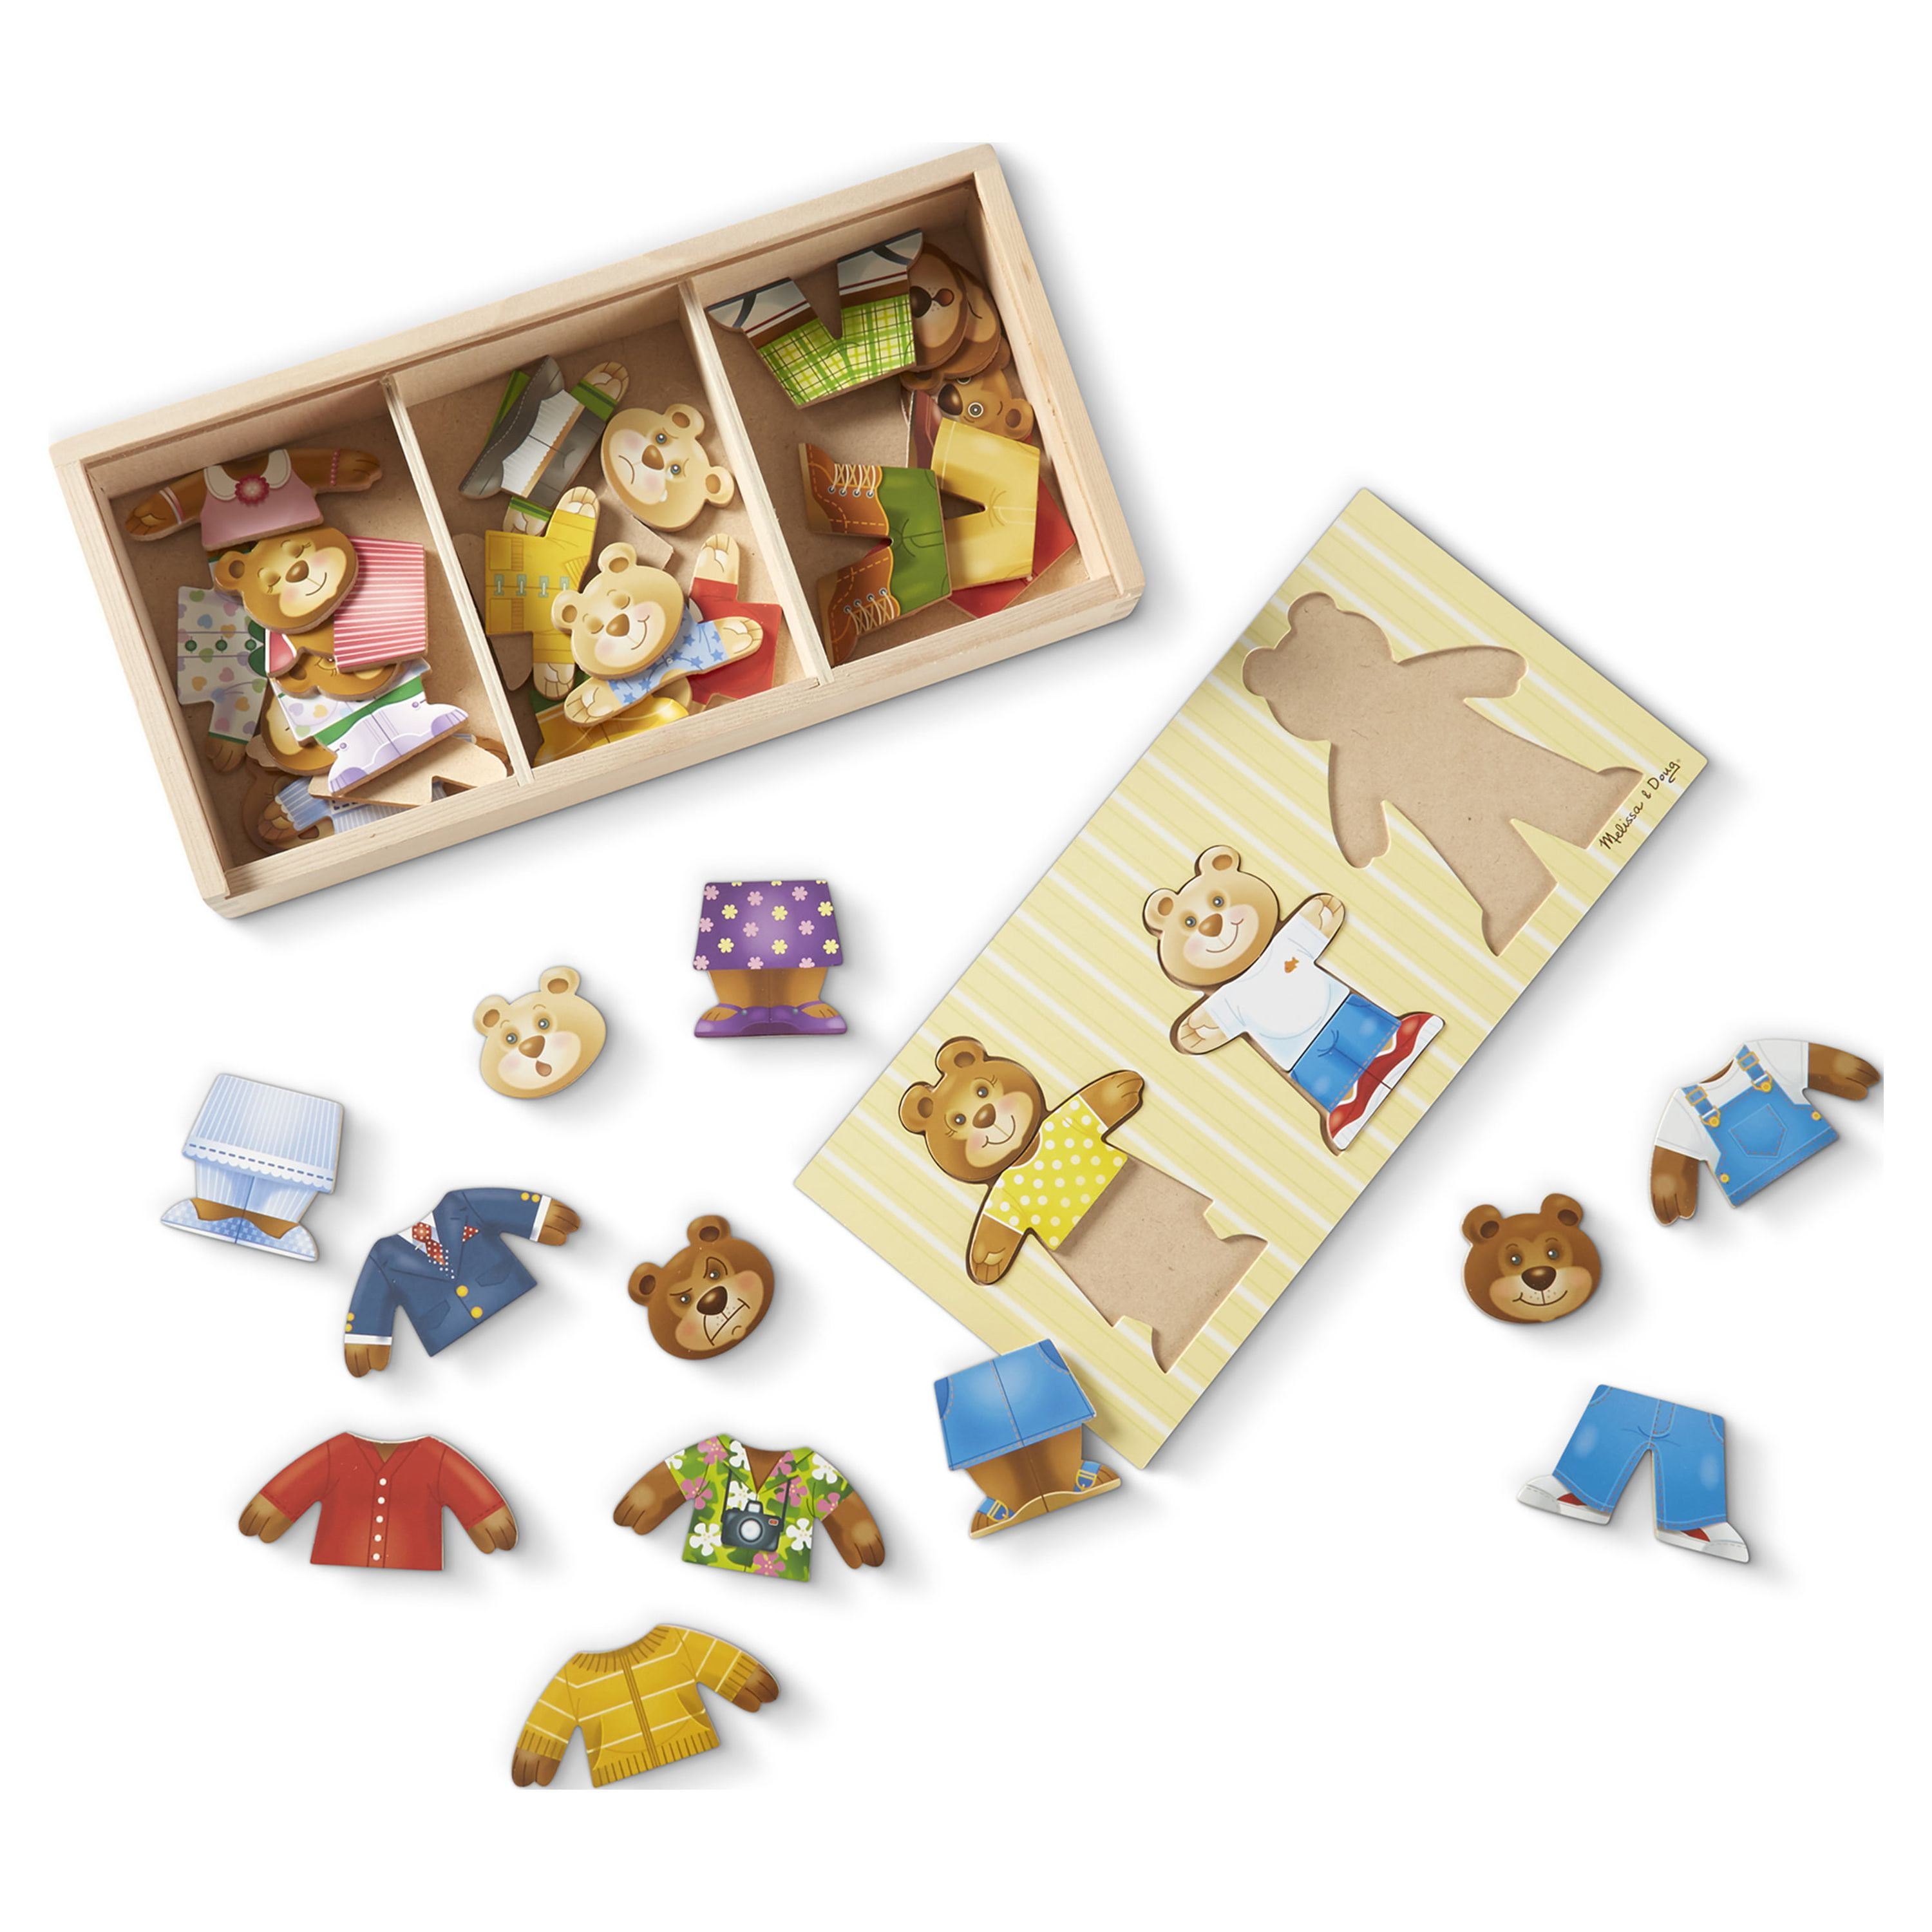 How do you all store these puzzles? We've ended up with a mess jumbled up  puzzle pieces : r/Mommit